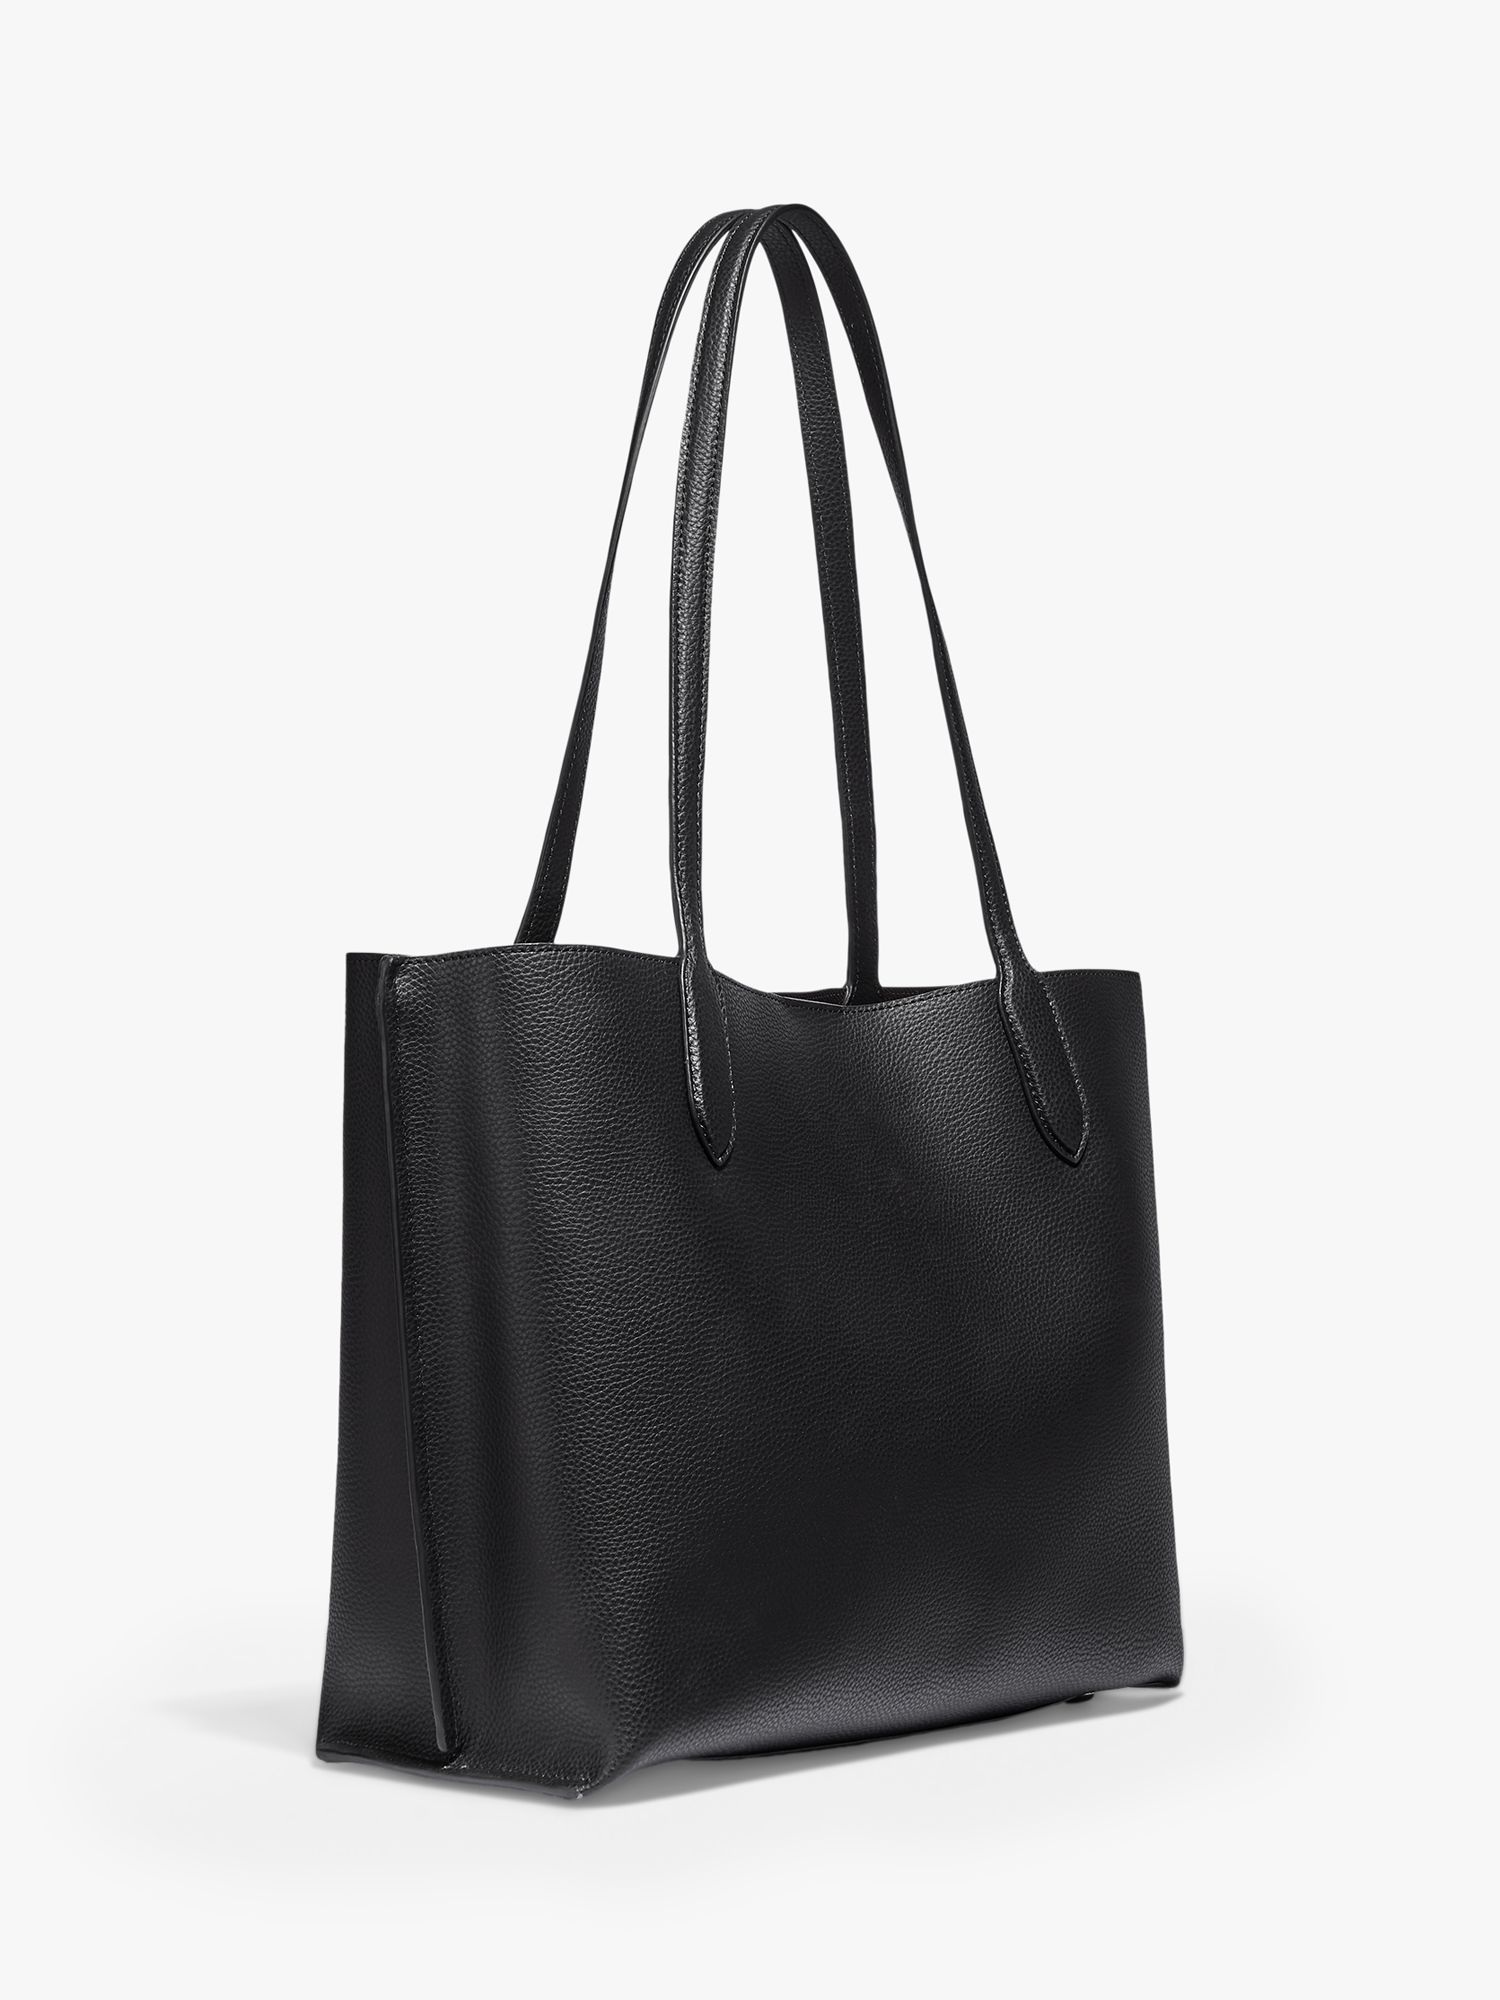 Coach Willow Leather Tote Bag, Black at John Lewis & Partners